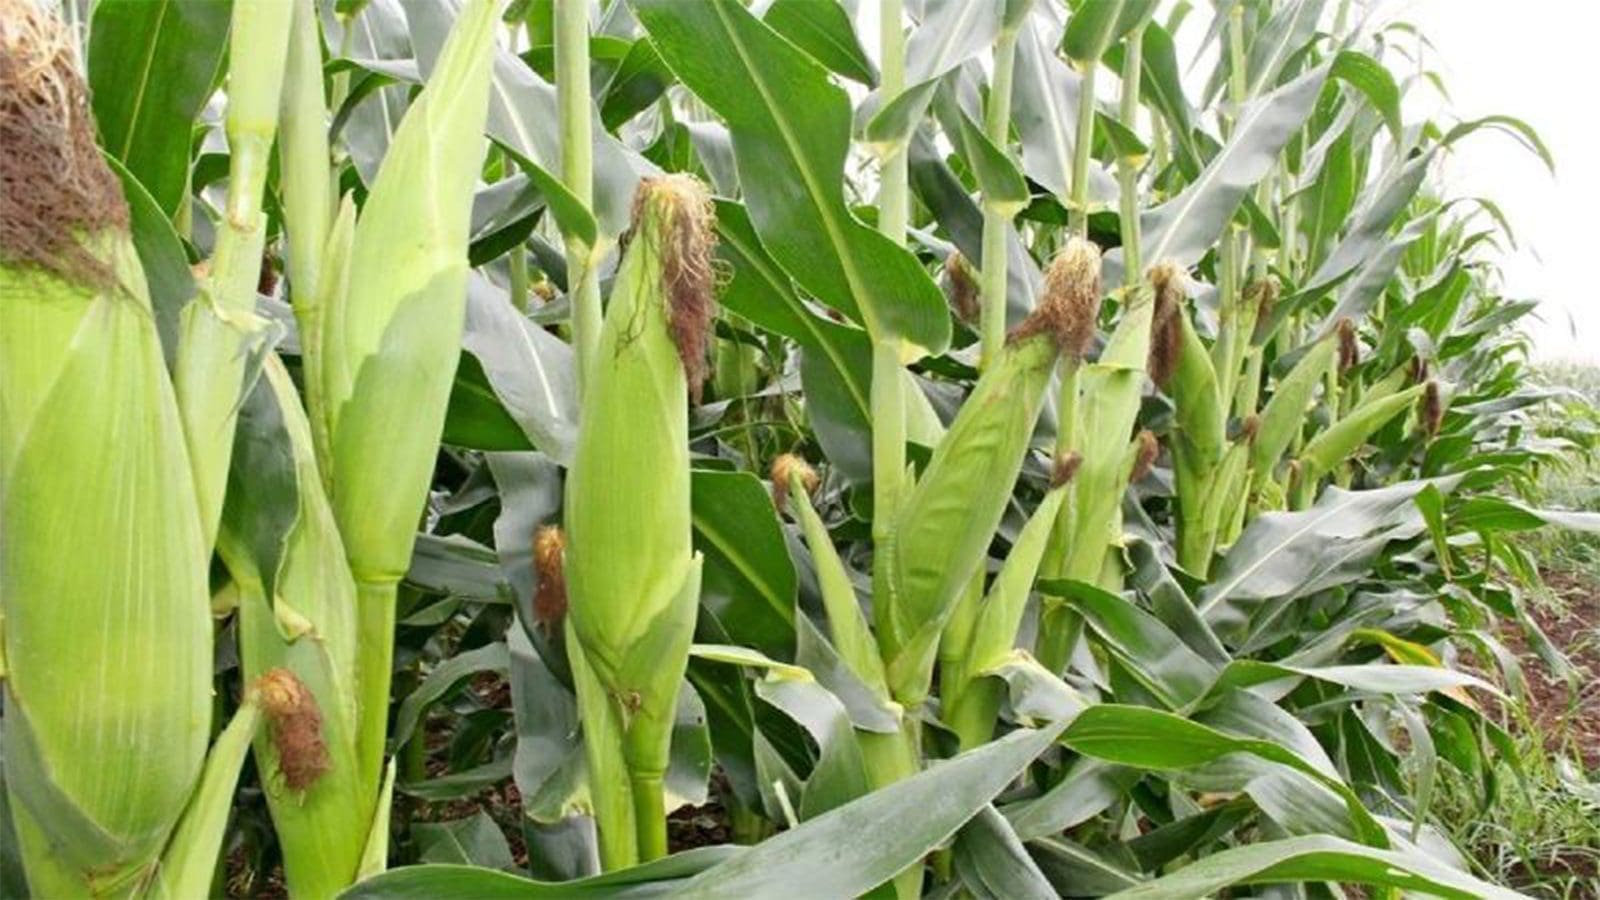 Kenya develops low-cost, high-quality hybrid maize seed to boost production